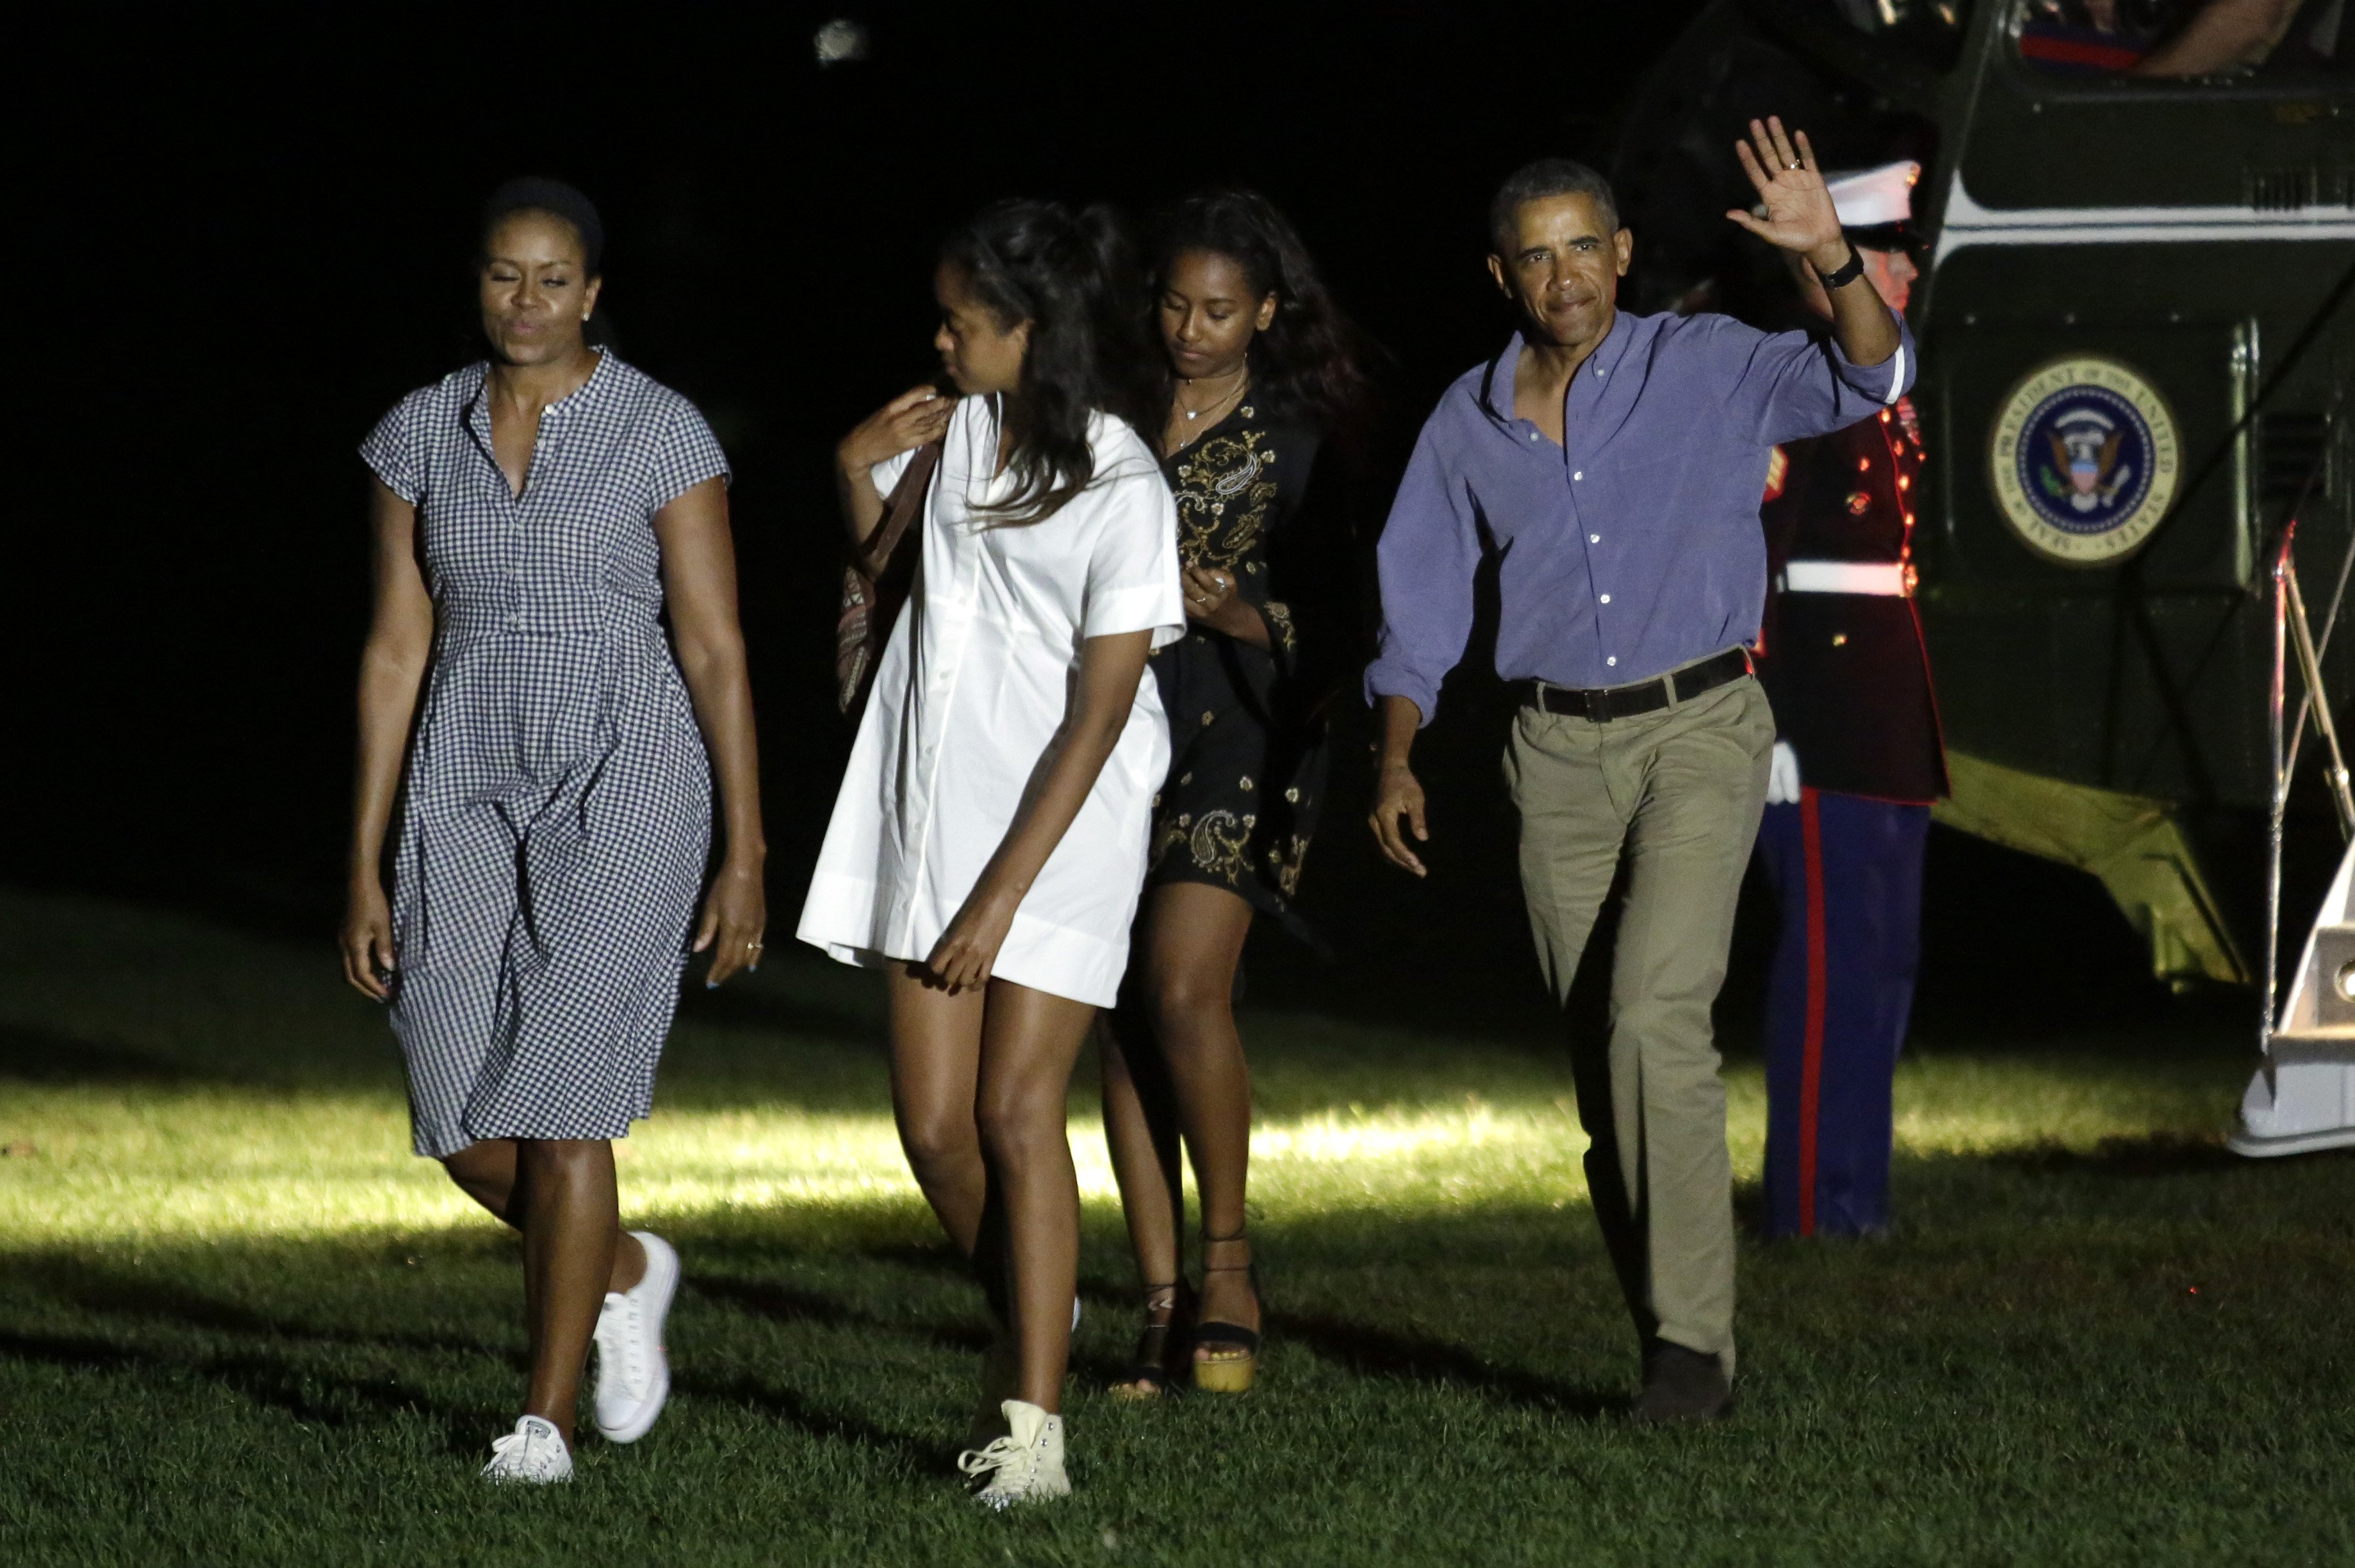 Michelle, Malia, Sasha and Barack Obama on the South Lawn of the White House after their summer vacation in Martha's Vineyard on August 21, 2016 | Source: Getty Images